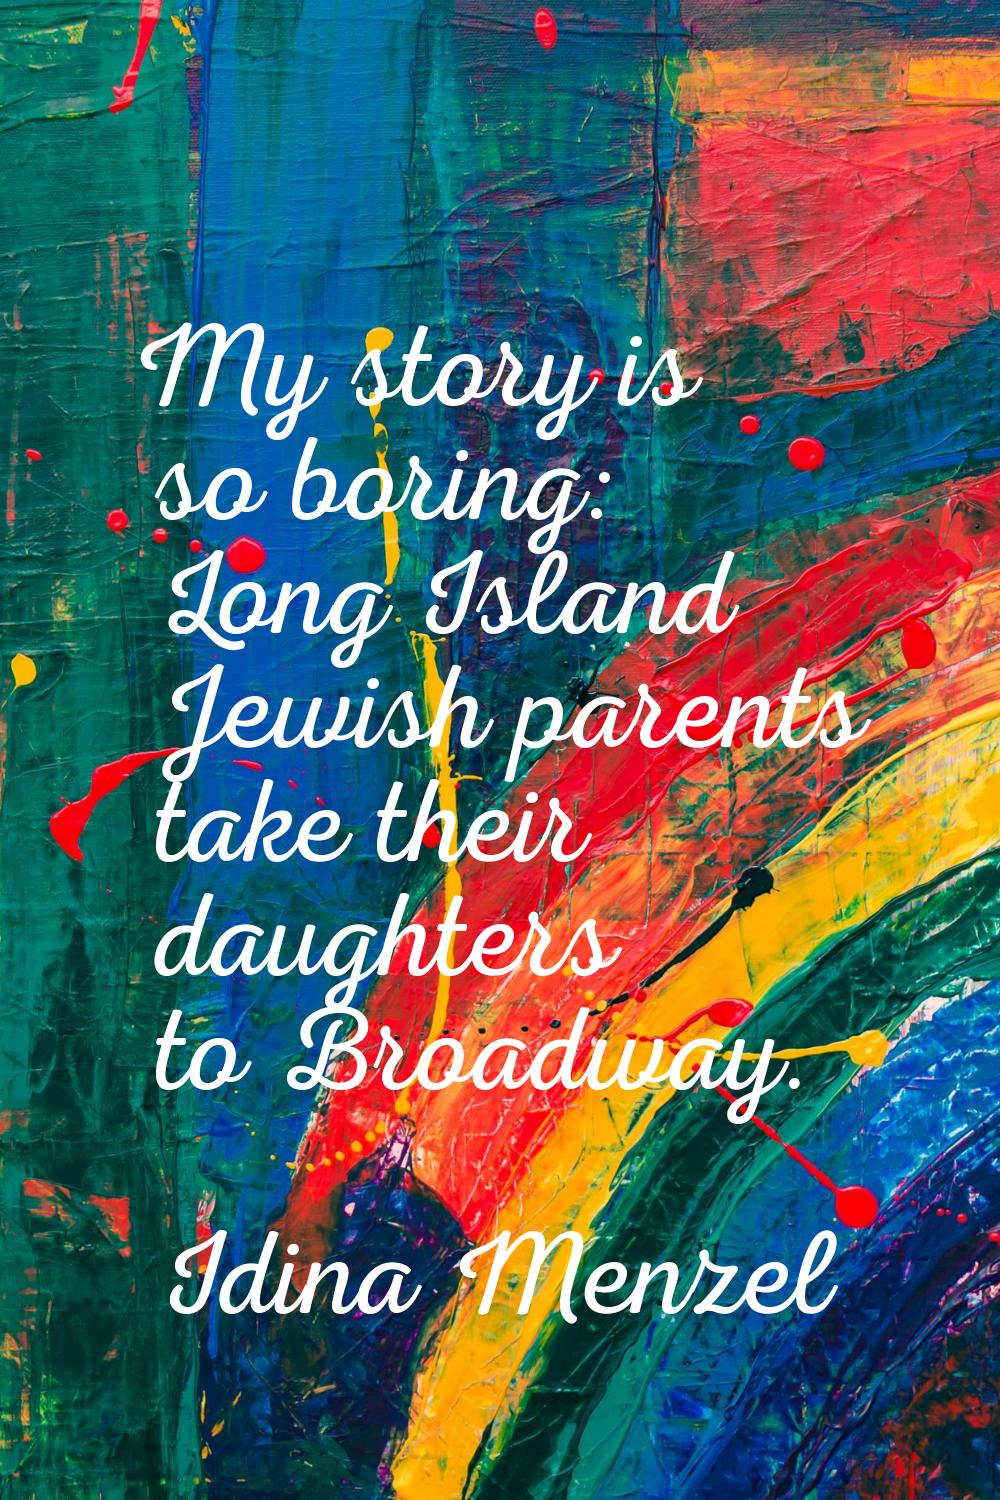 My story is so boring: Long Island Jewish parents take their daughters to Broadway.